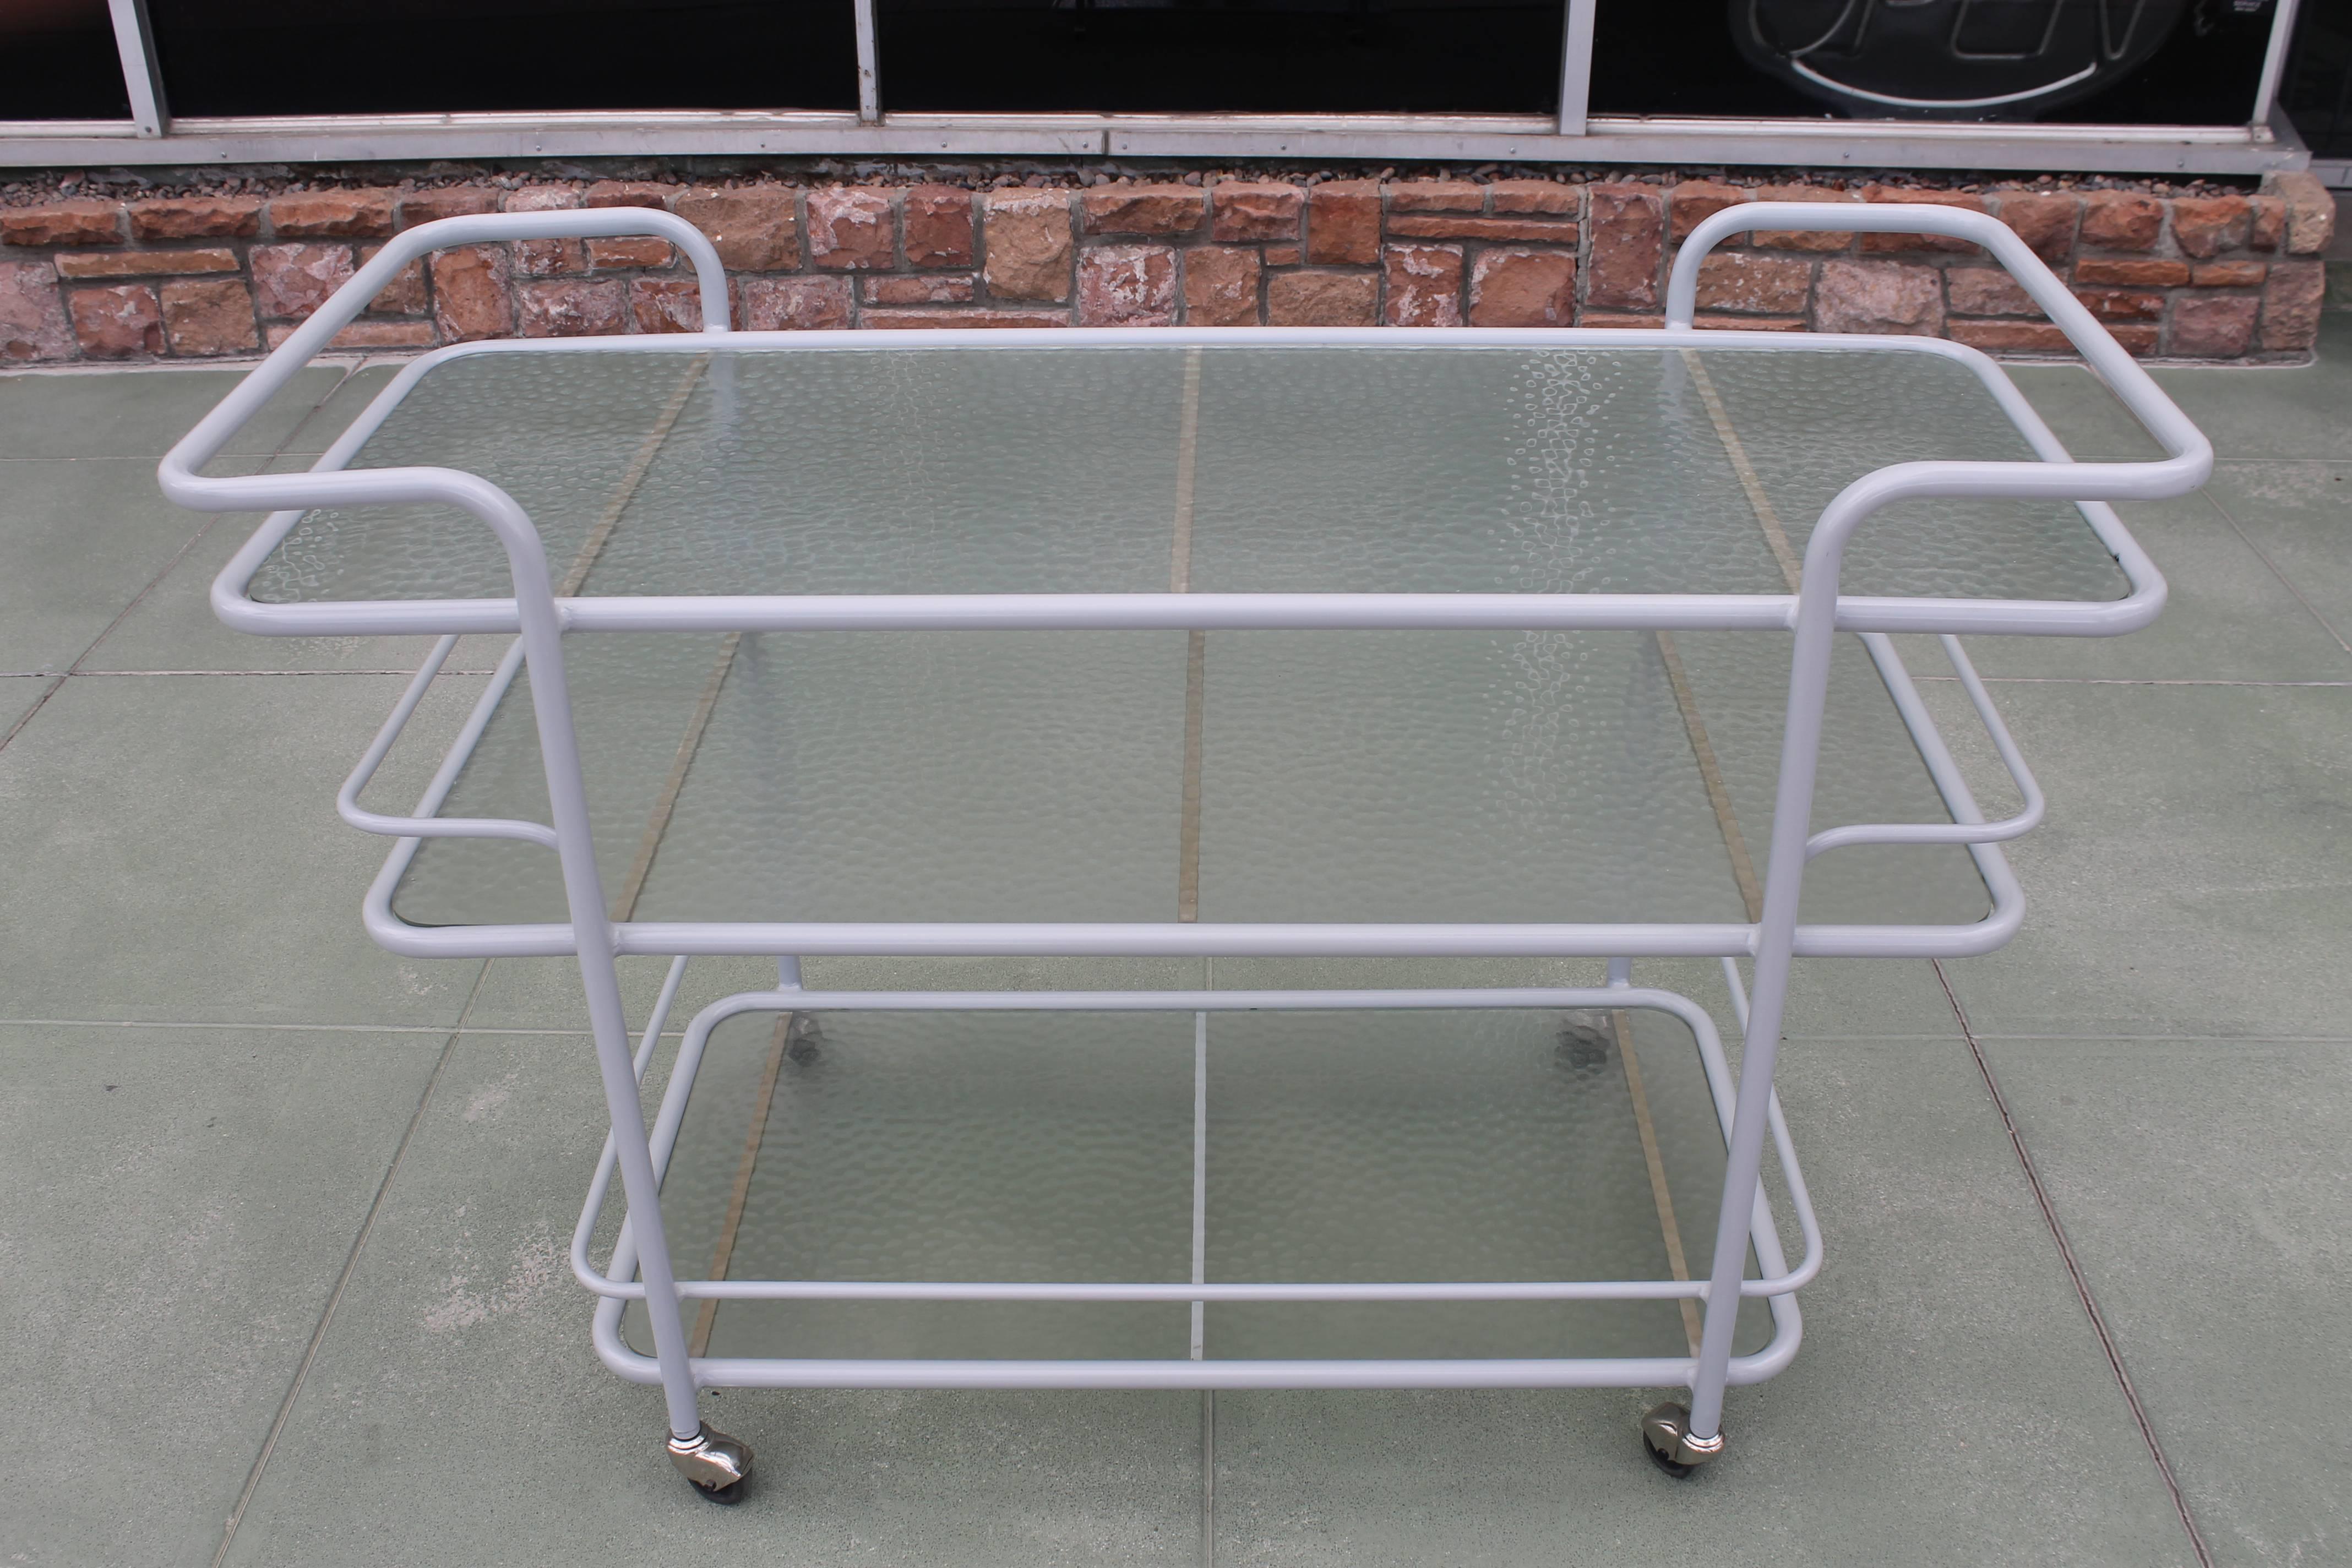 Three tier aluminum bar cart in the style of Walter Lamb. I was recently informed that Richard Frinier designed this cart for Brown Jordan. Contains original glass and steel rollers. This bar cart has been sand blasted and is in its raw state.